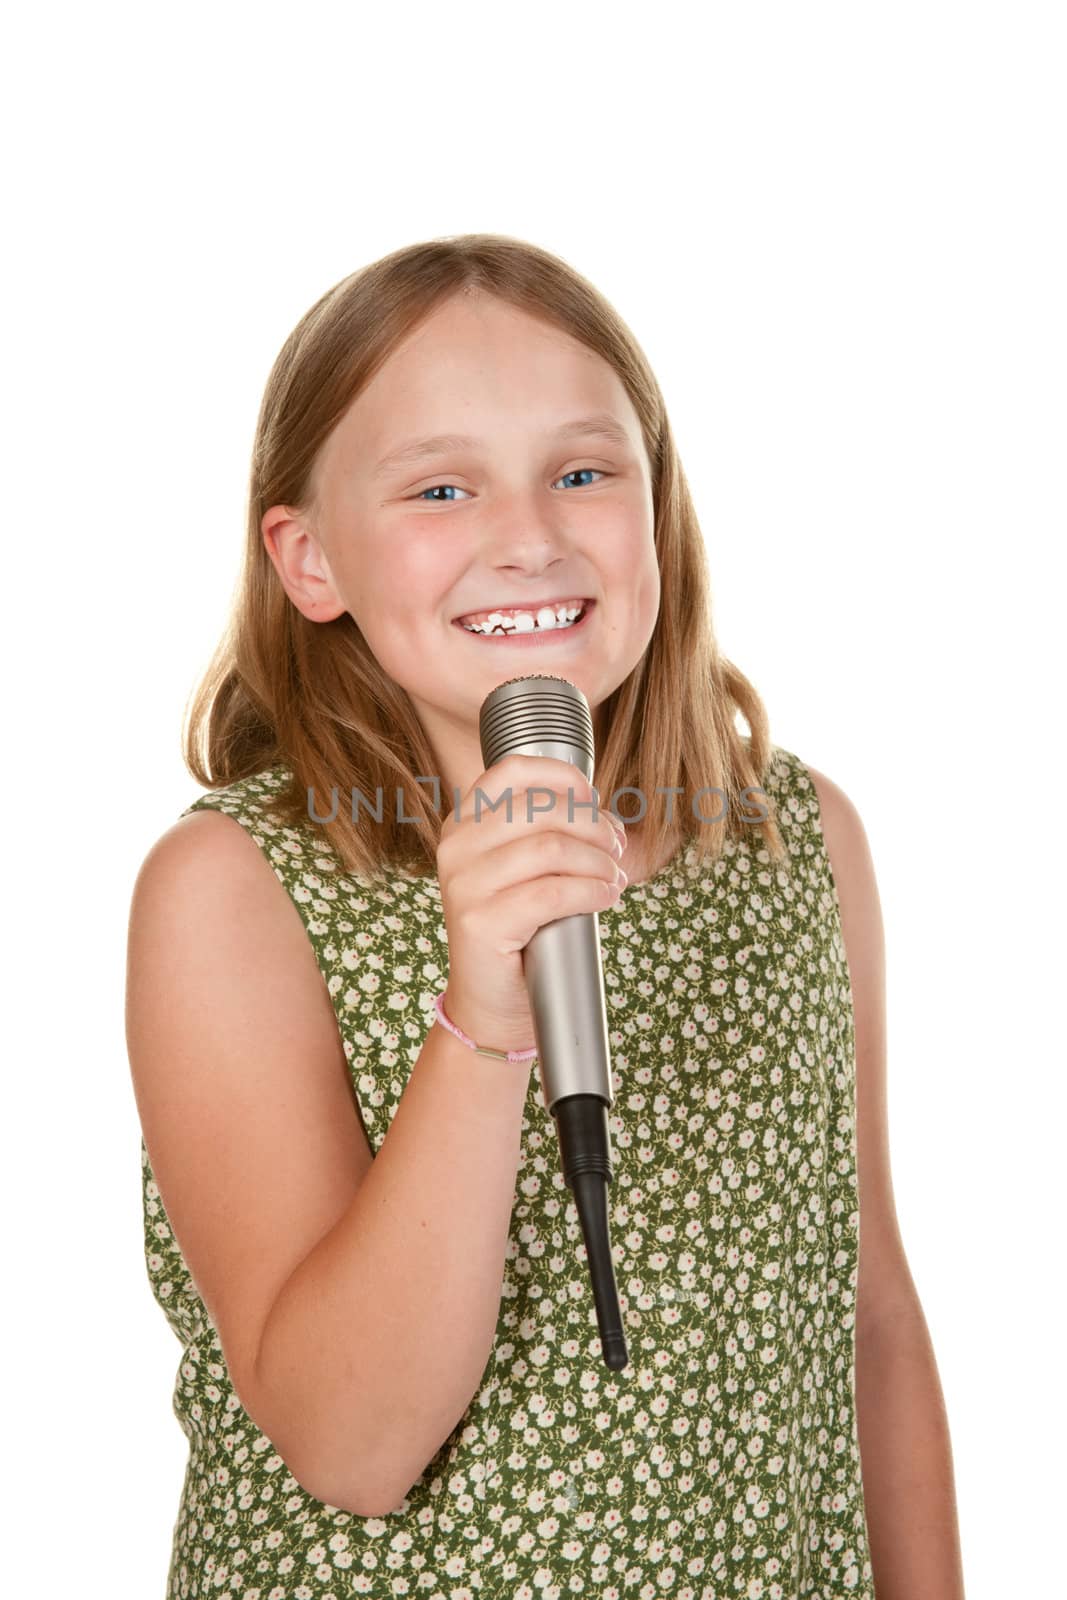 a young girl isolated on white background singing a song